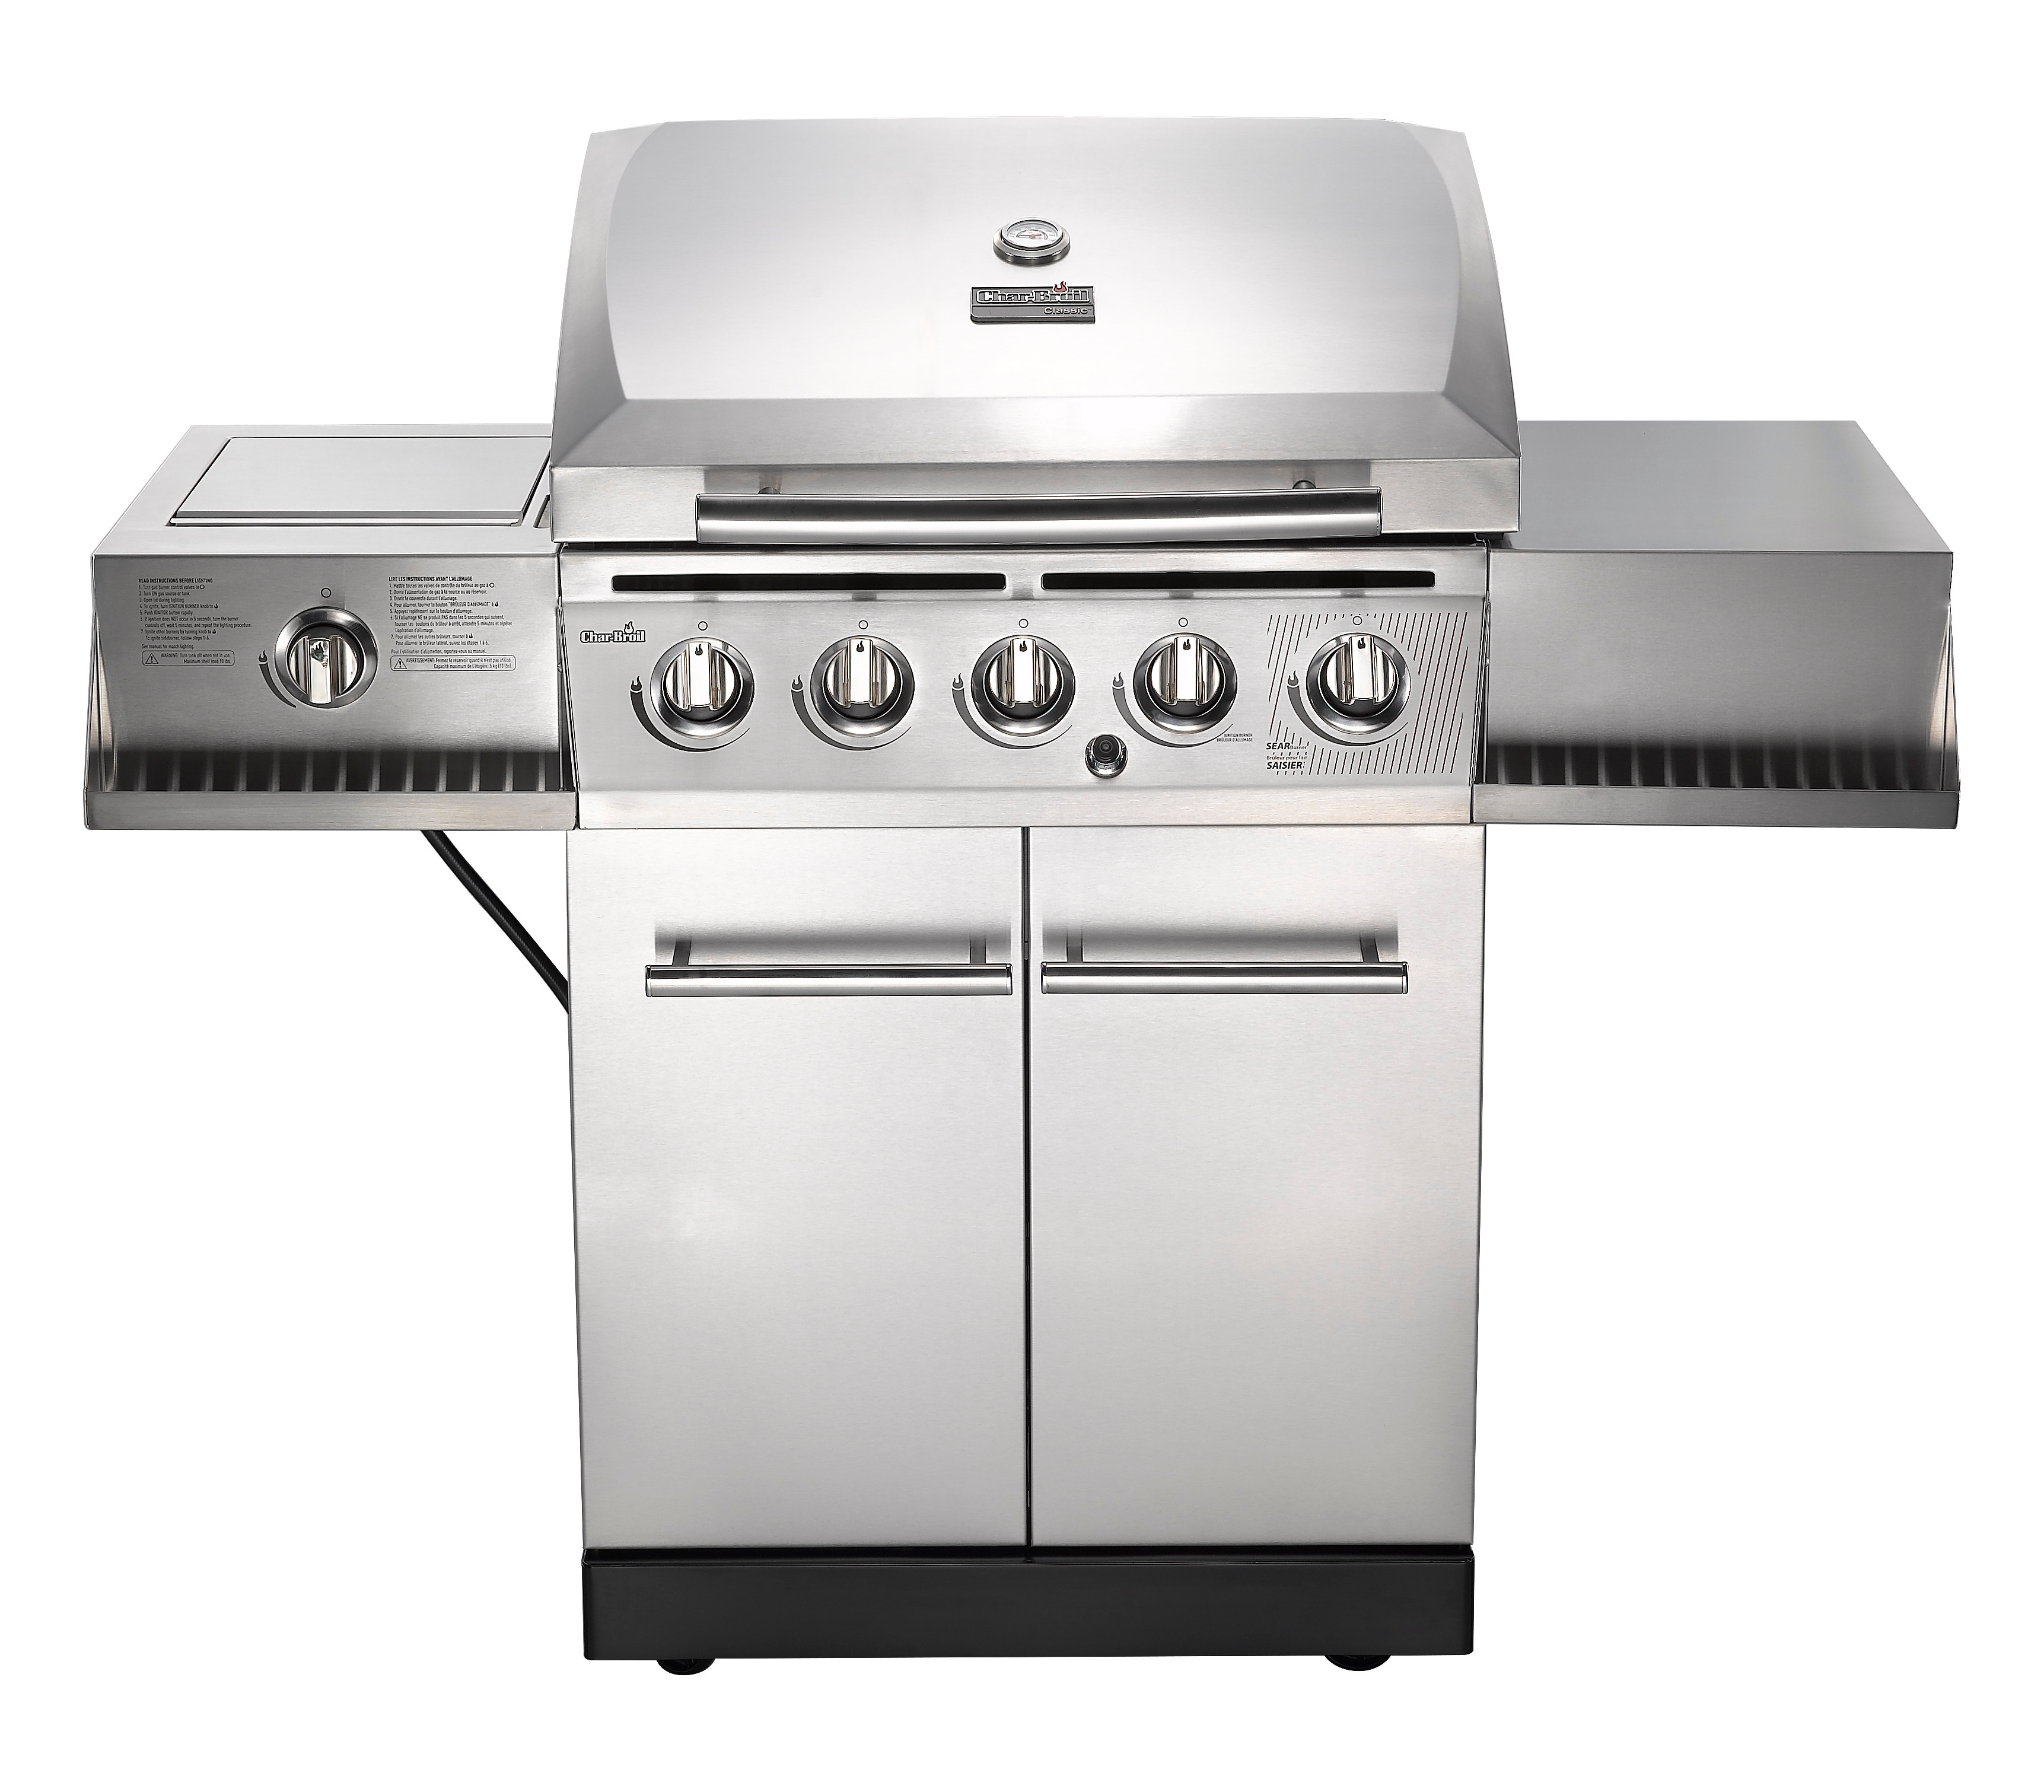 Char-Broil 5 Burner Gas Grill - Outdoor Living - Grills ...